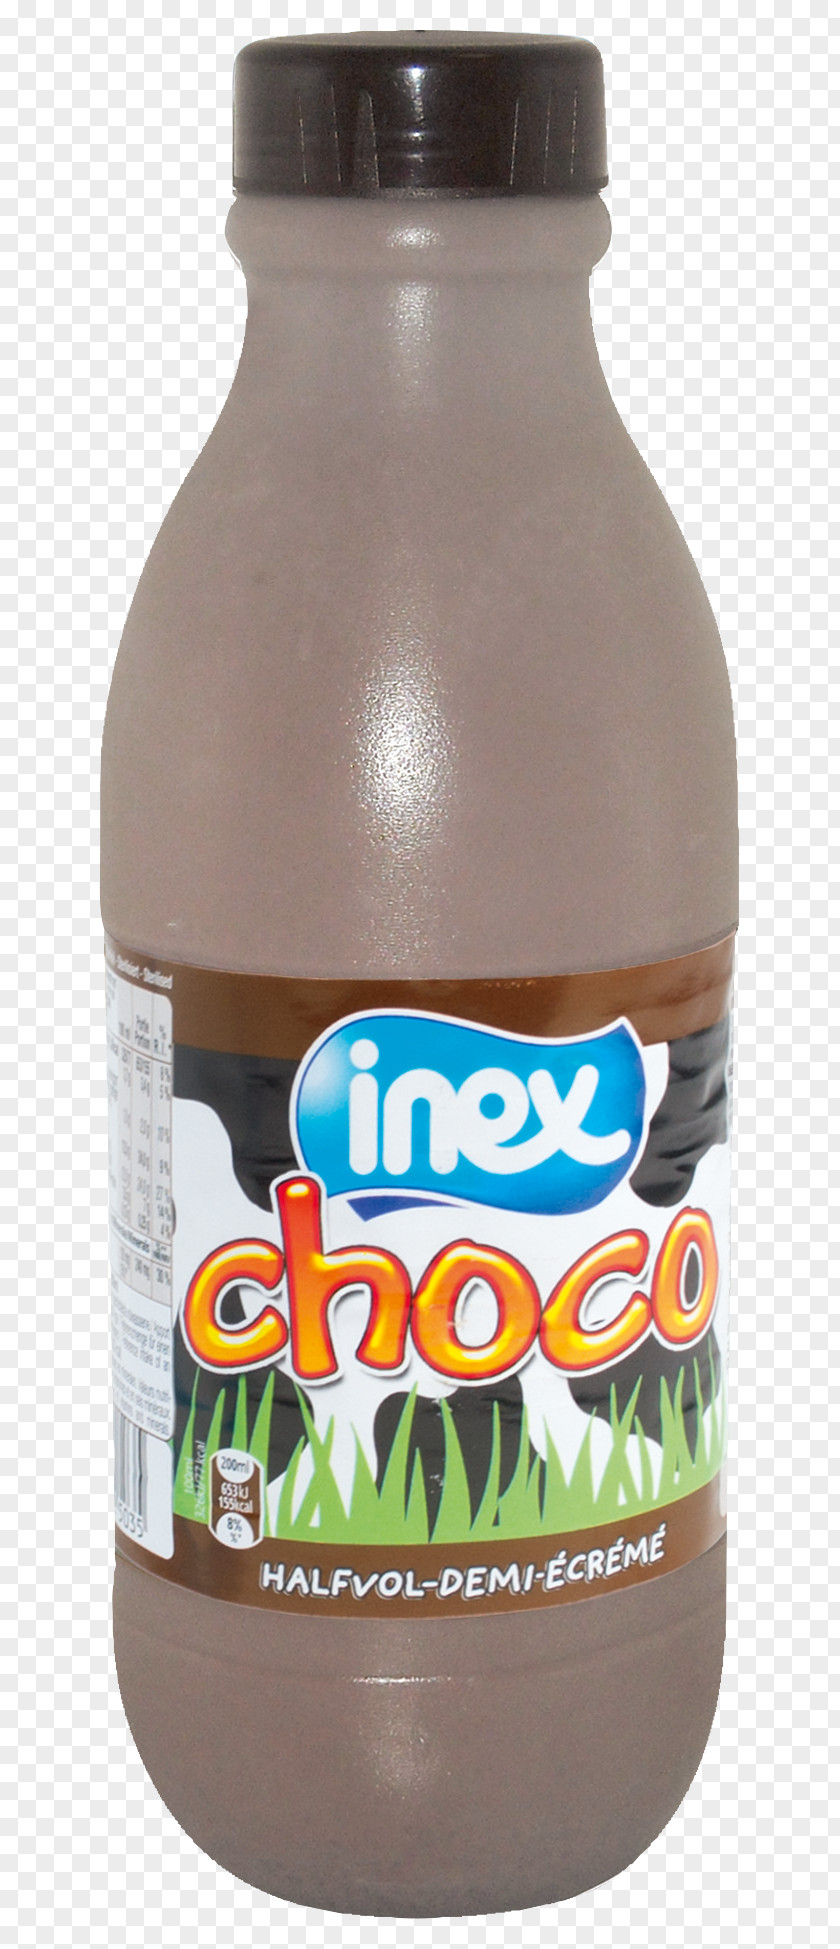 Milk Chocolate Bottle Reduced Fat Cream PNG